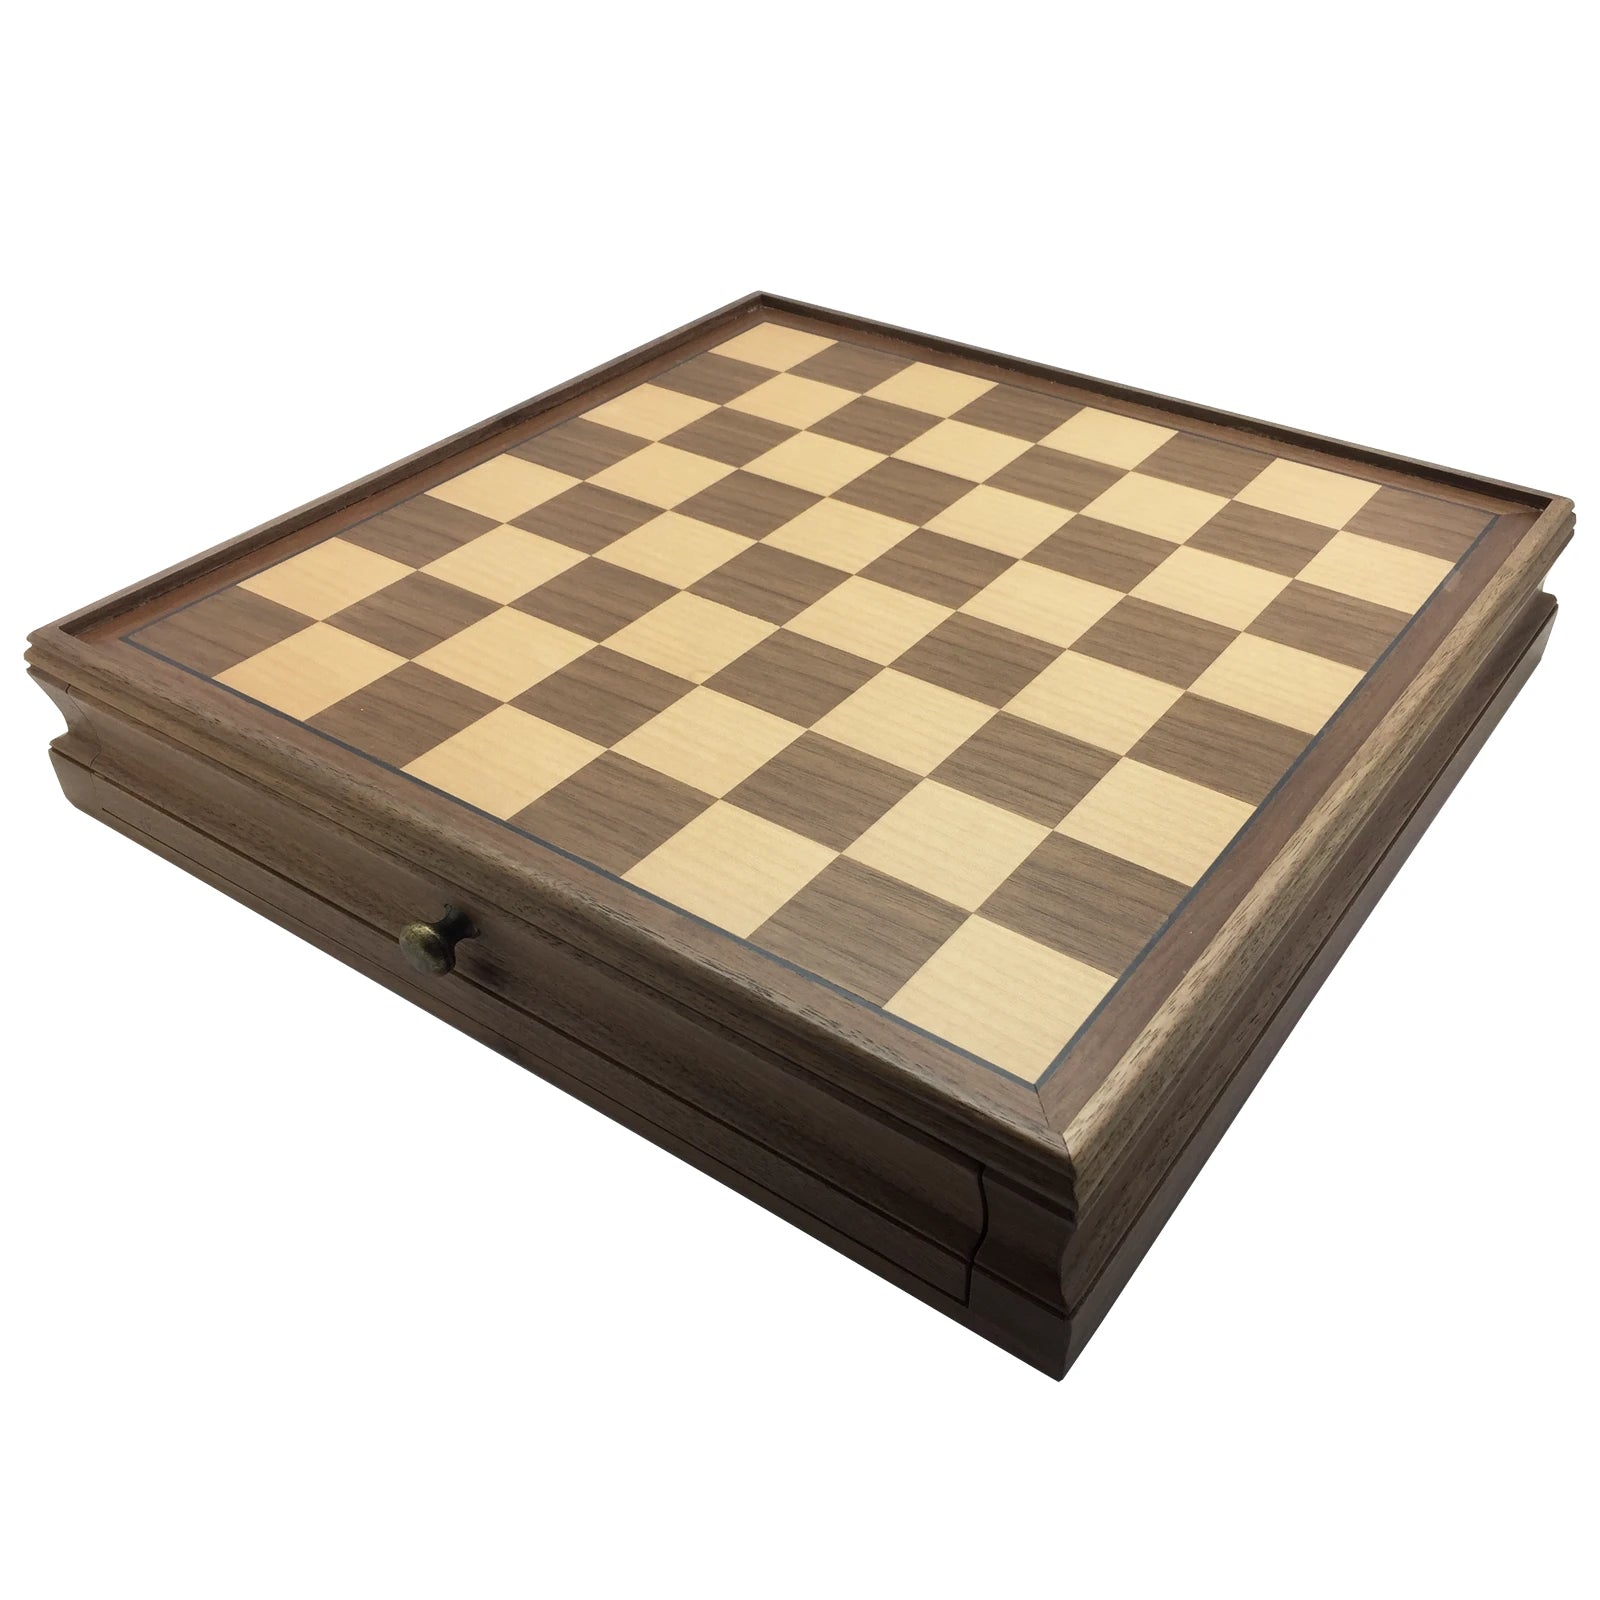 Wood chess board with drawers.